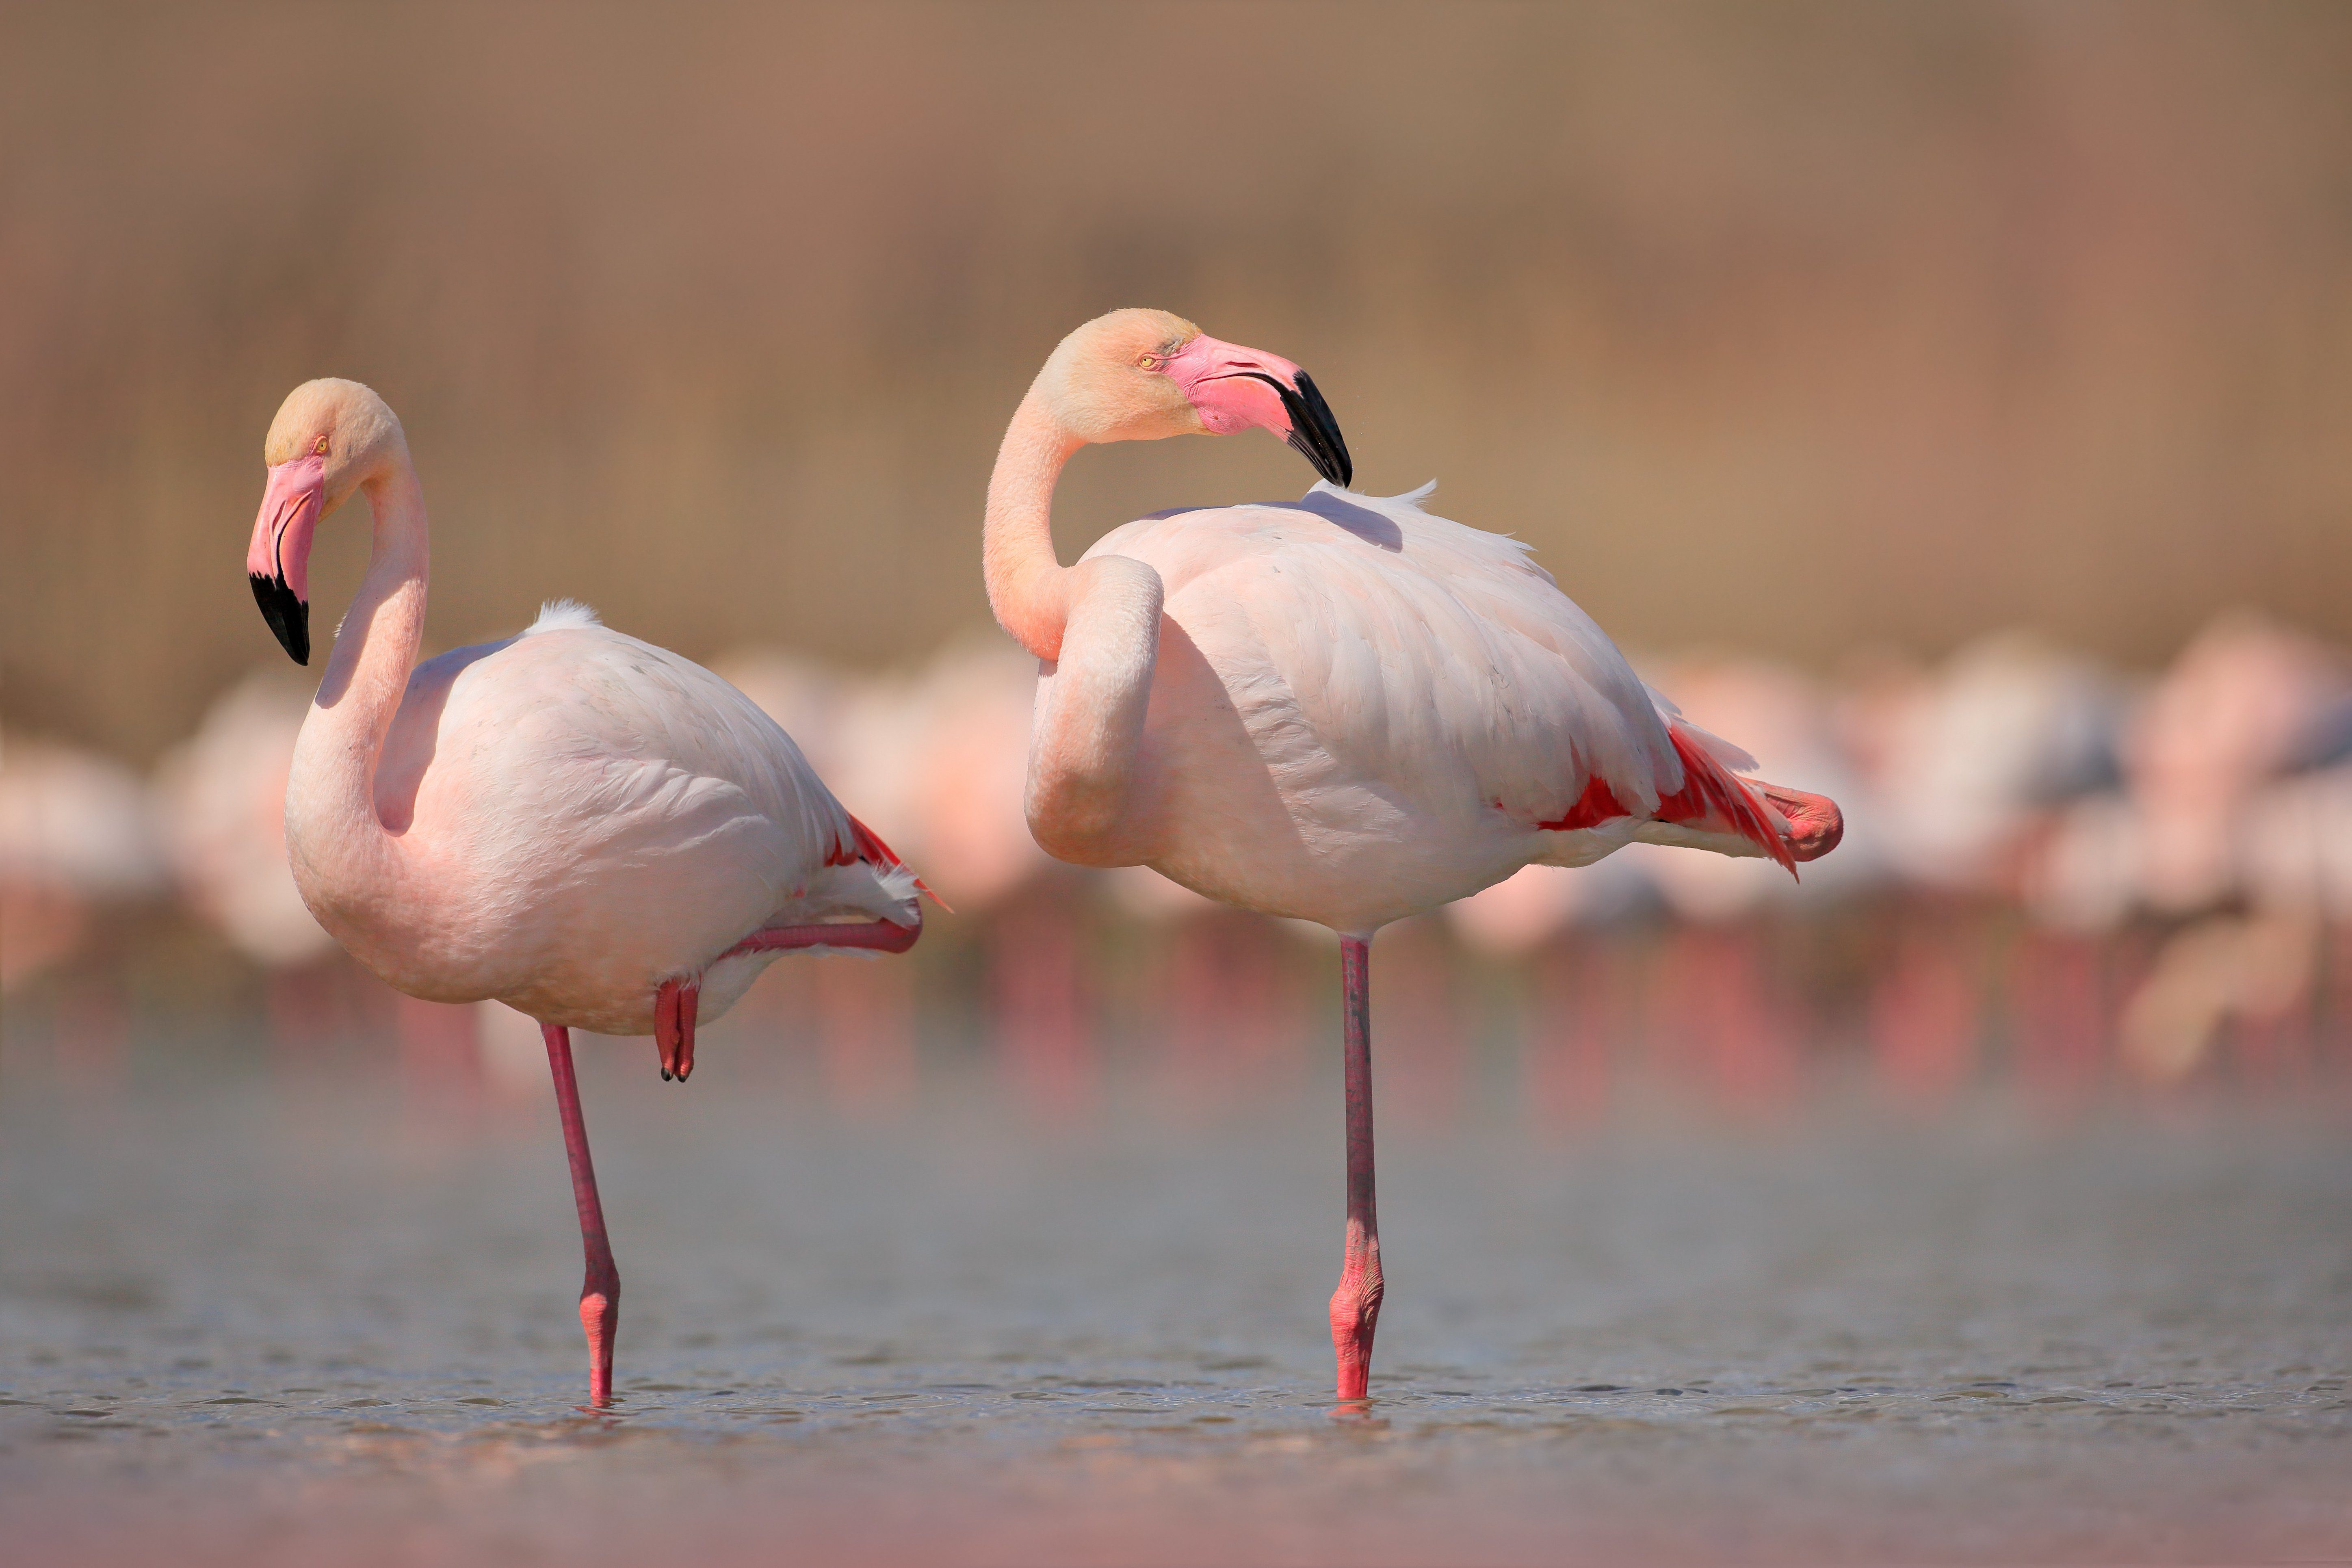 Pink Big Birds Greater Flamingos Phoenicopterus Ruber In The Water Camargue France. Flamingos Cleaning Feathers. Wildlife Animal Scene From Nature 